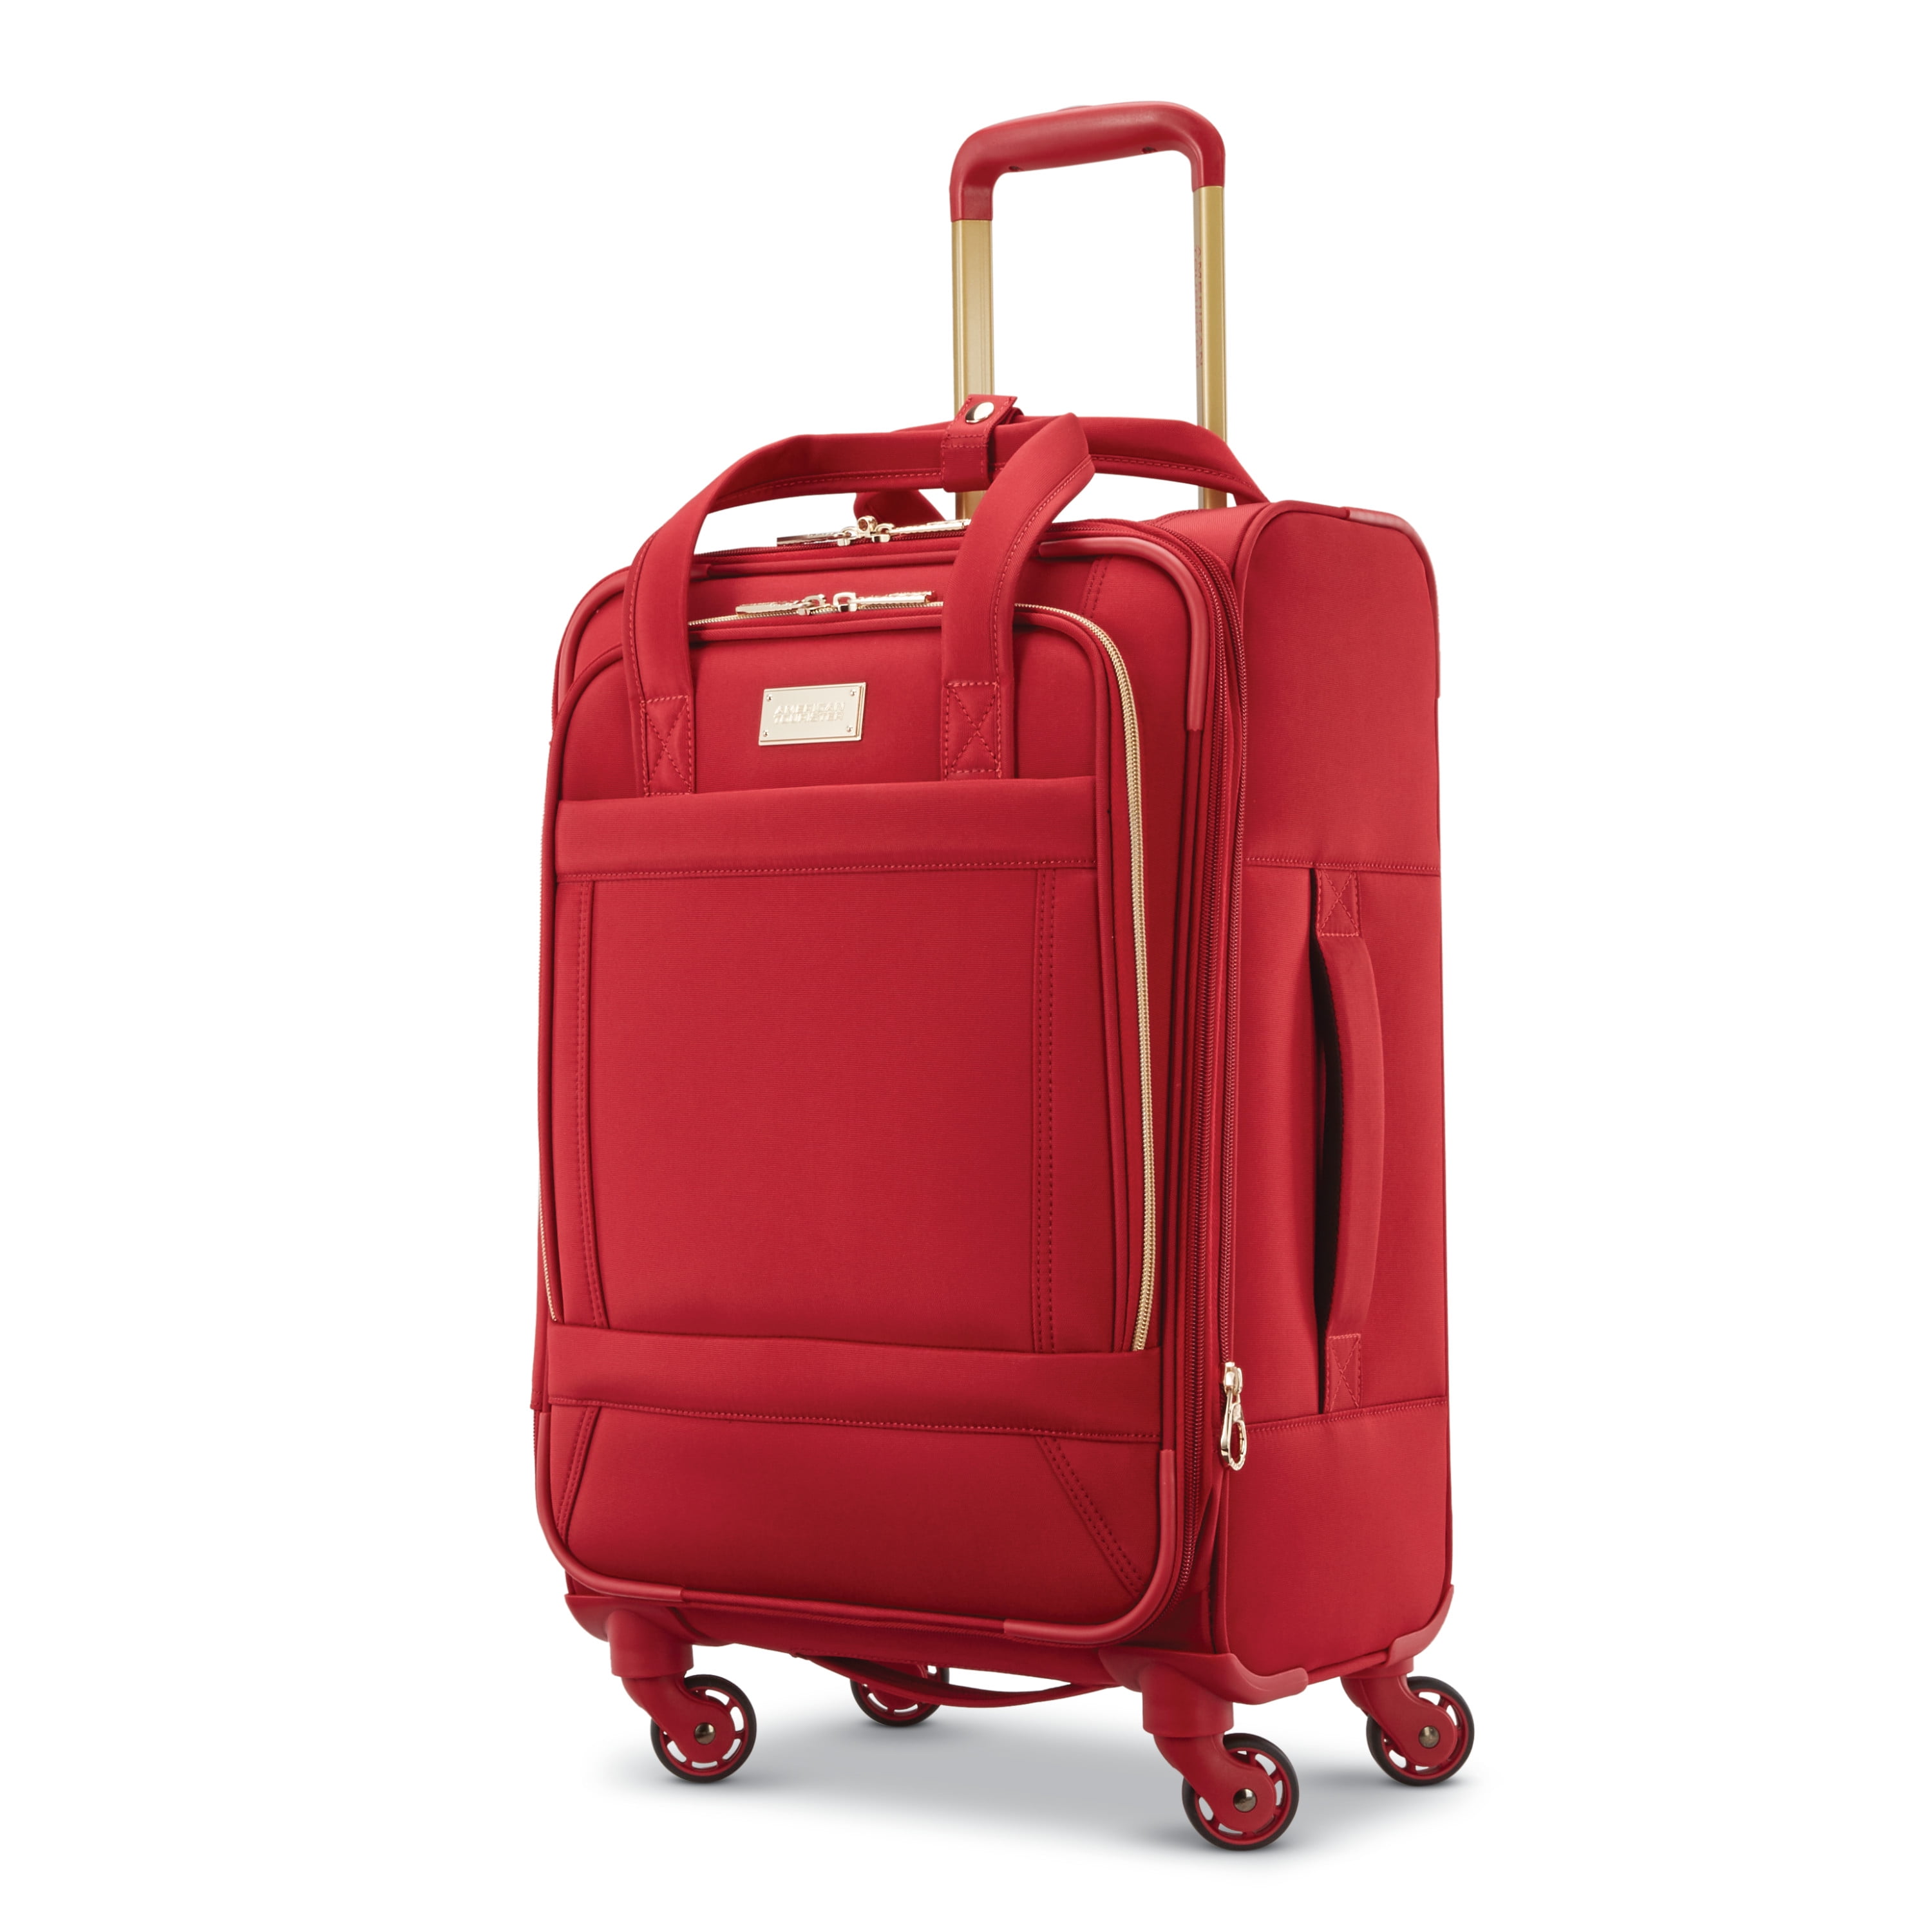 American Tourister Belle Voyage 25-inch Softside Spinner, Checked Luggage, Piece